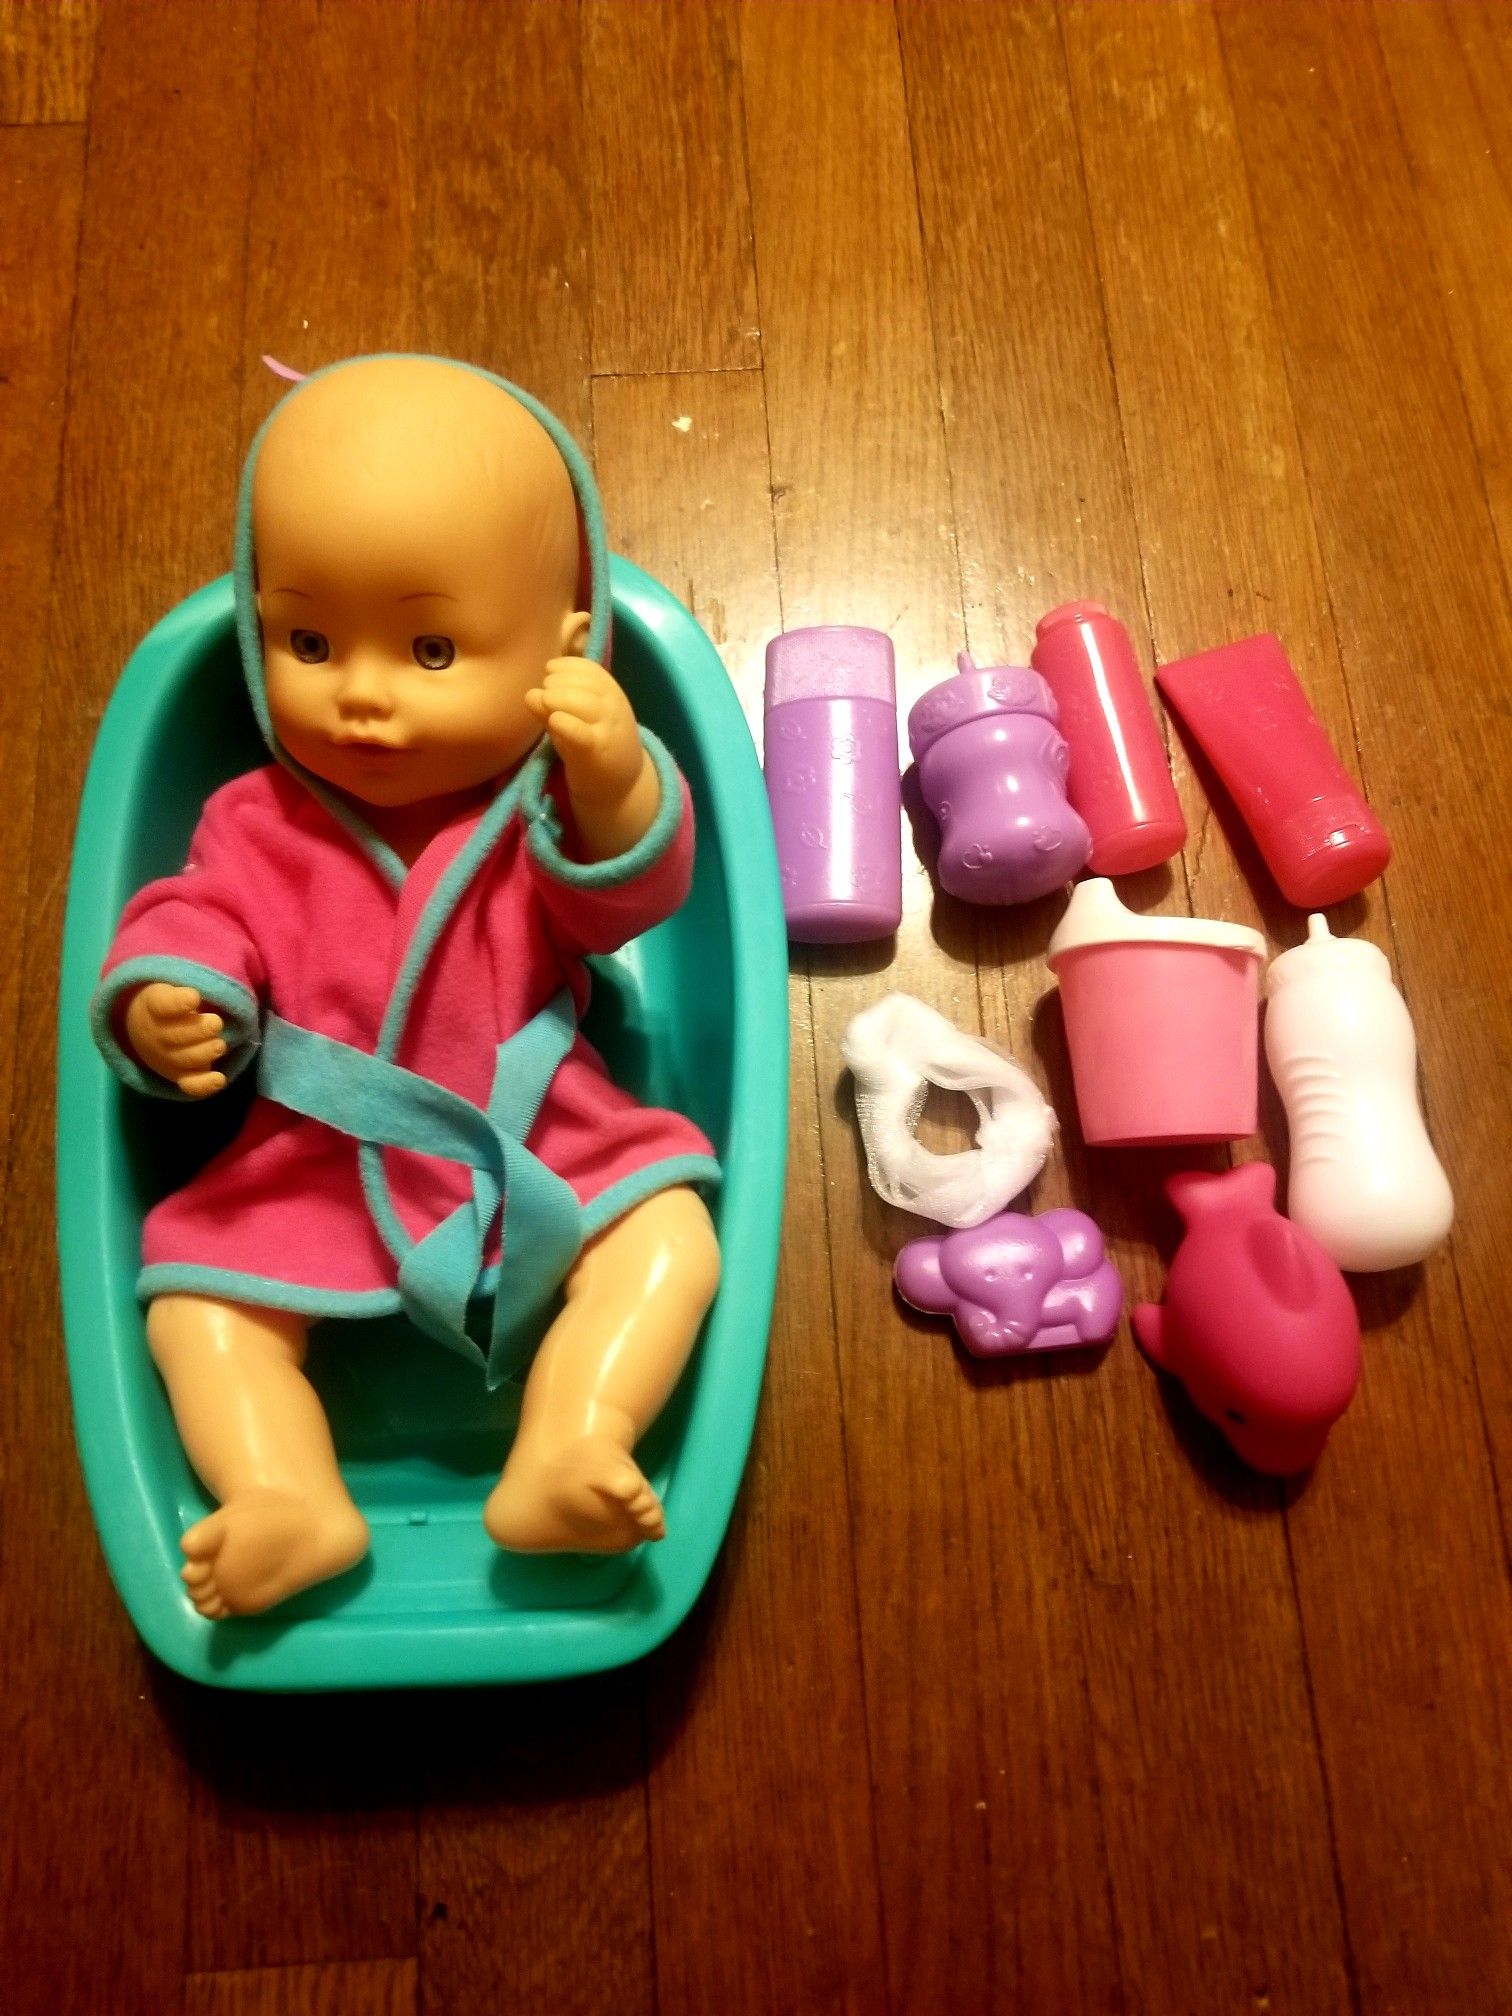 Brand NEW take a bath baby toy. Great baby/toddler toy!